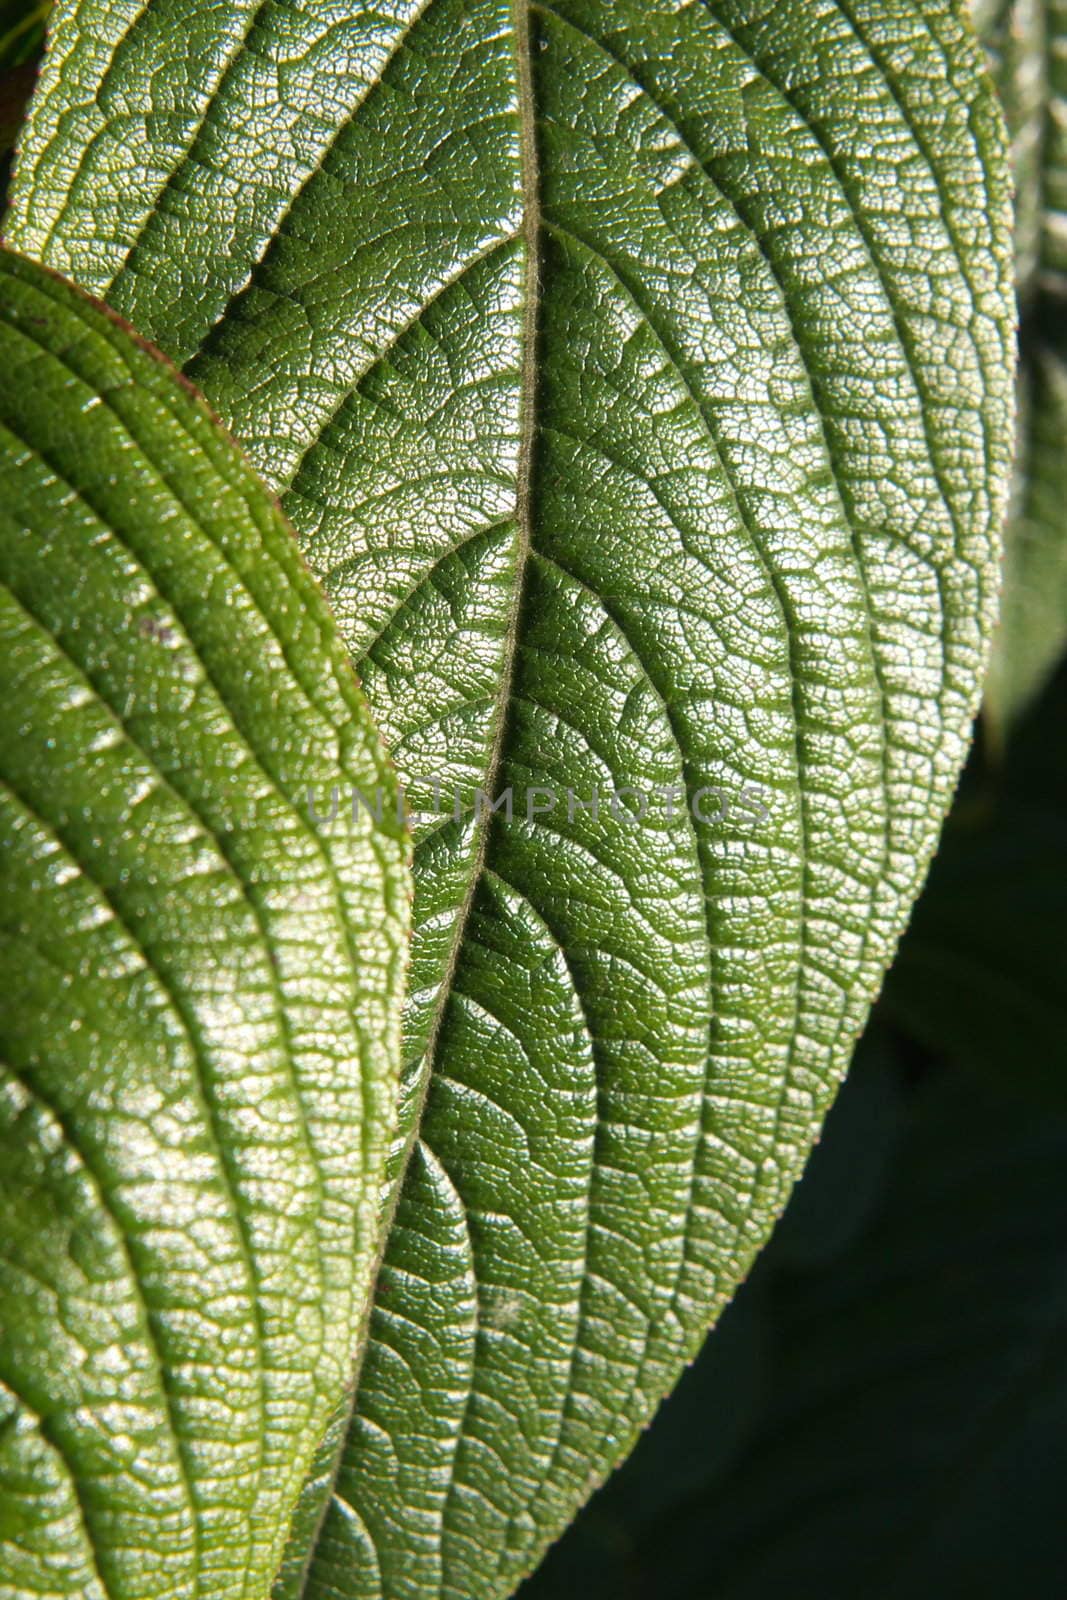 Green leaves background, focus is on background leaf, shallow focus/ depth of field.